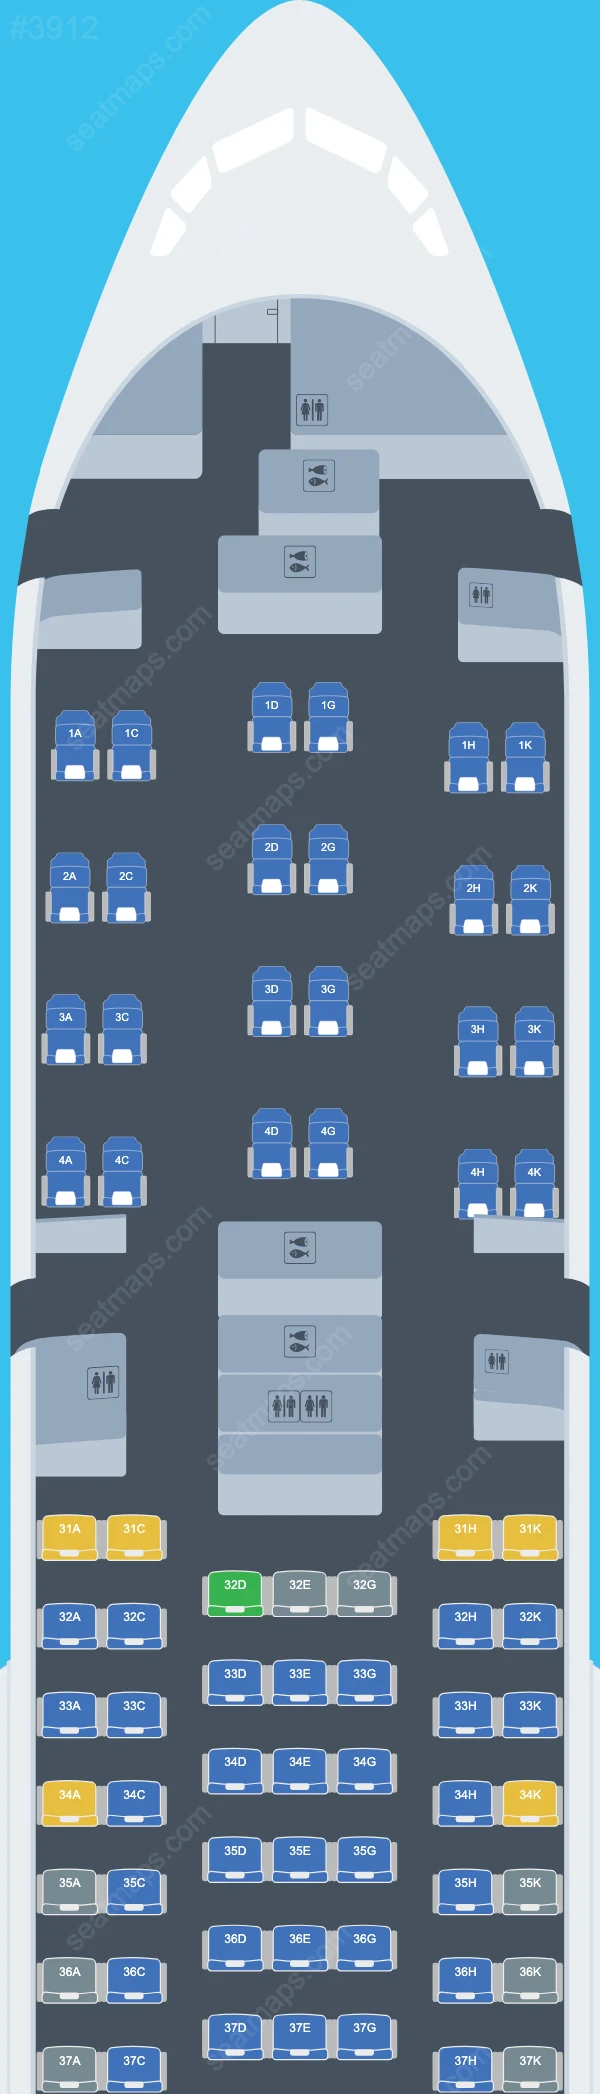 China Southern Boeing 777 Seat Maps 777-200 V.1